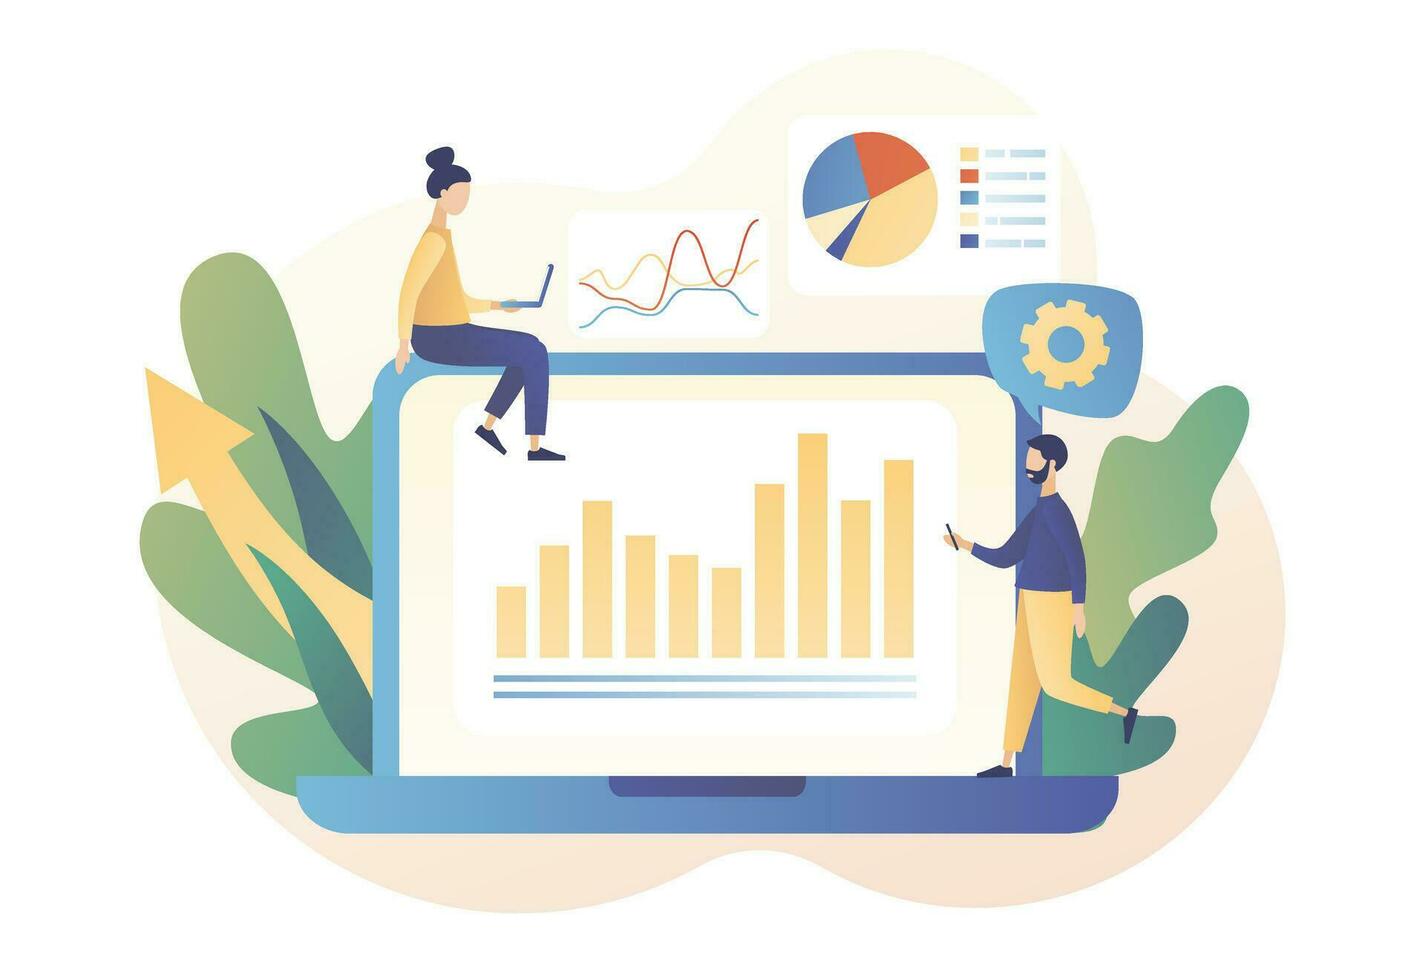 Data analytics consept. Business analysis online. Tiny people are studying the infographic. Modern flat cartoon style. Vector illustration on white background